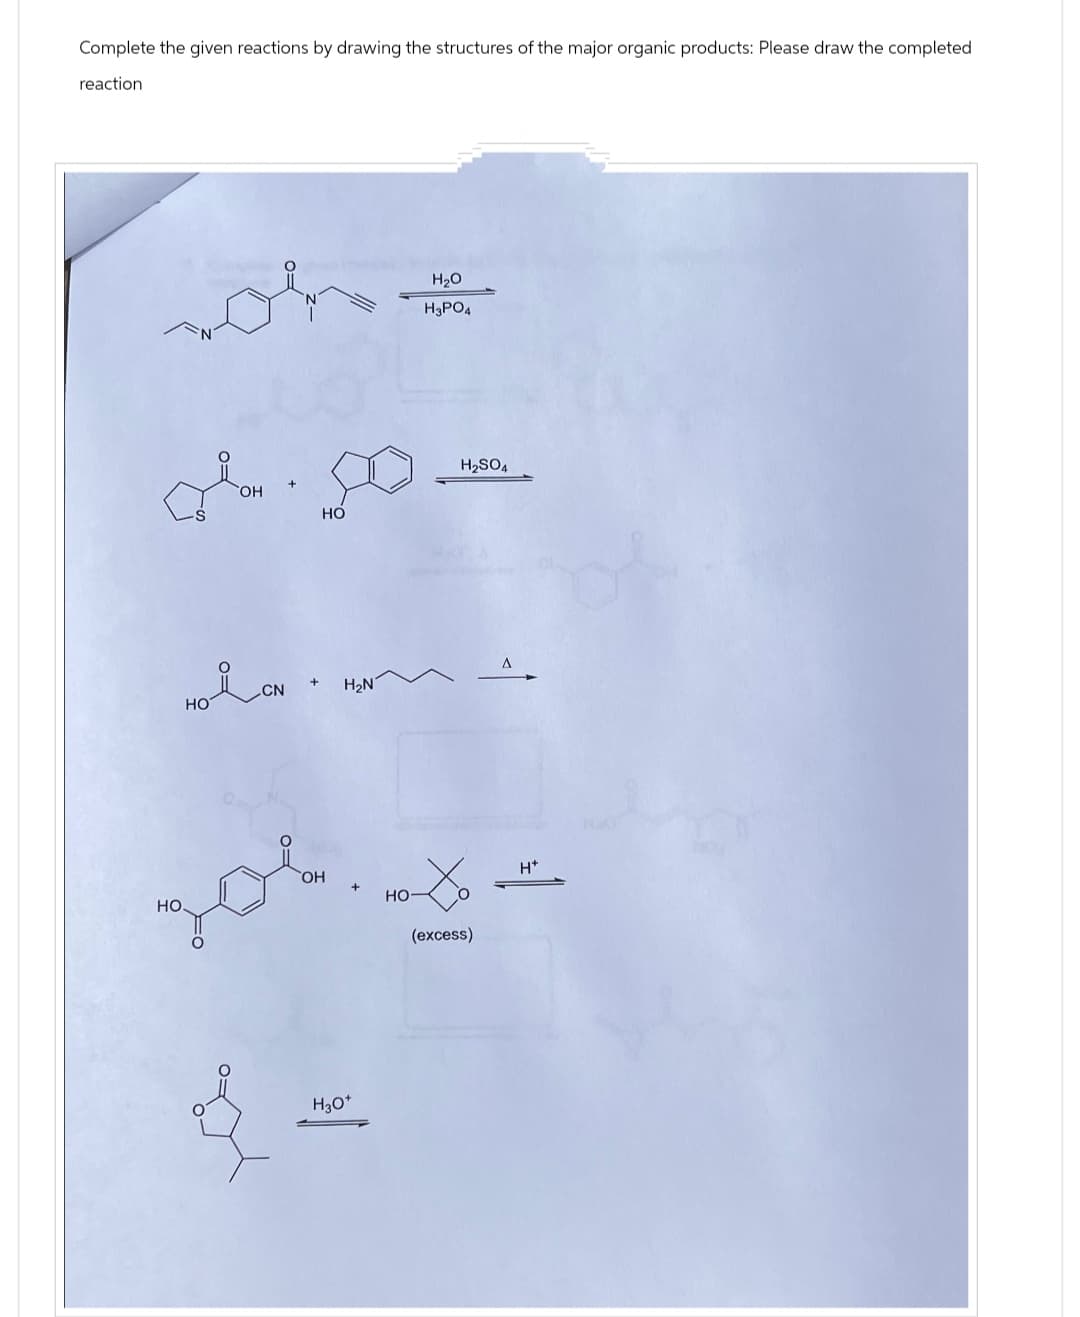 Complete the given reactions by drawing the structures of the major organic products: Please draw the completed
reaction
OH
HO
HOCN
H₂N
H₂O
H3PO4
OH
HO
HO.
(excess)
H3O+
H2SO4
H*